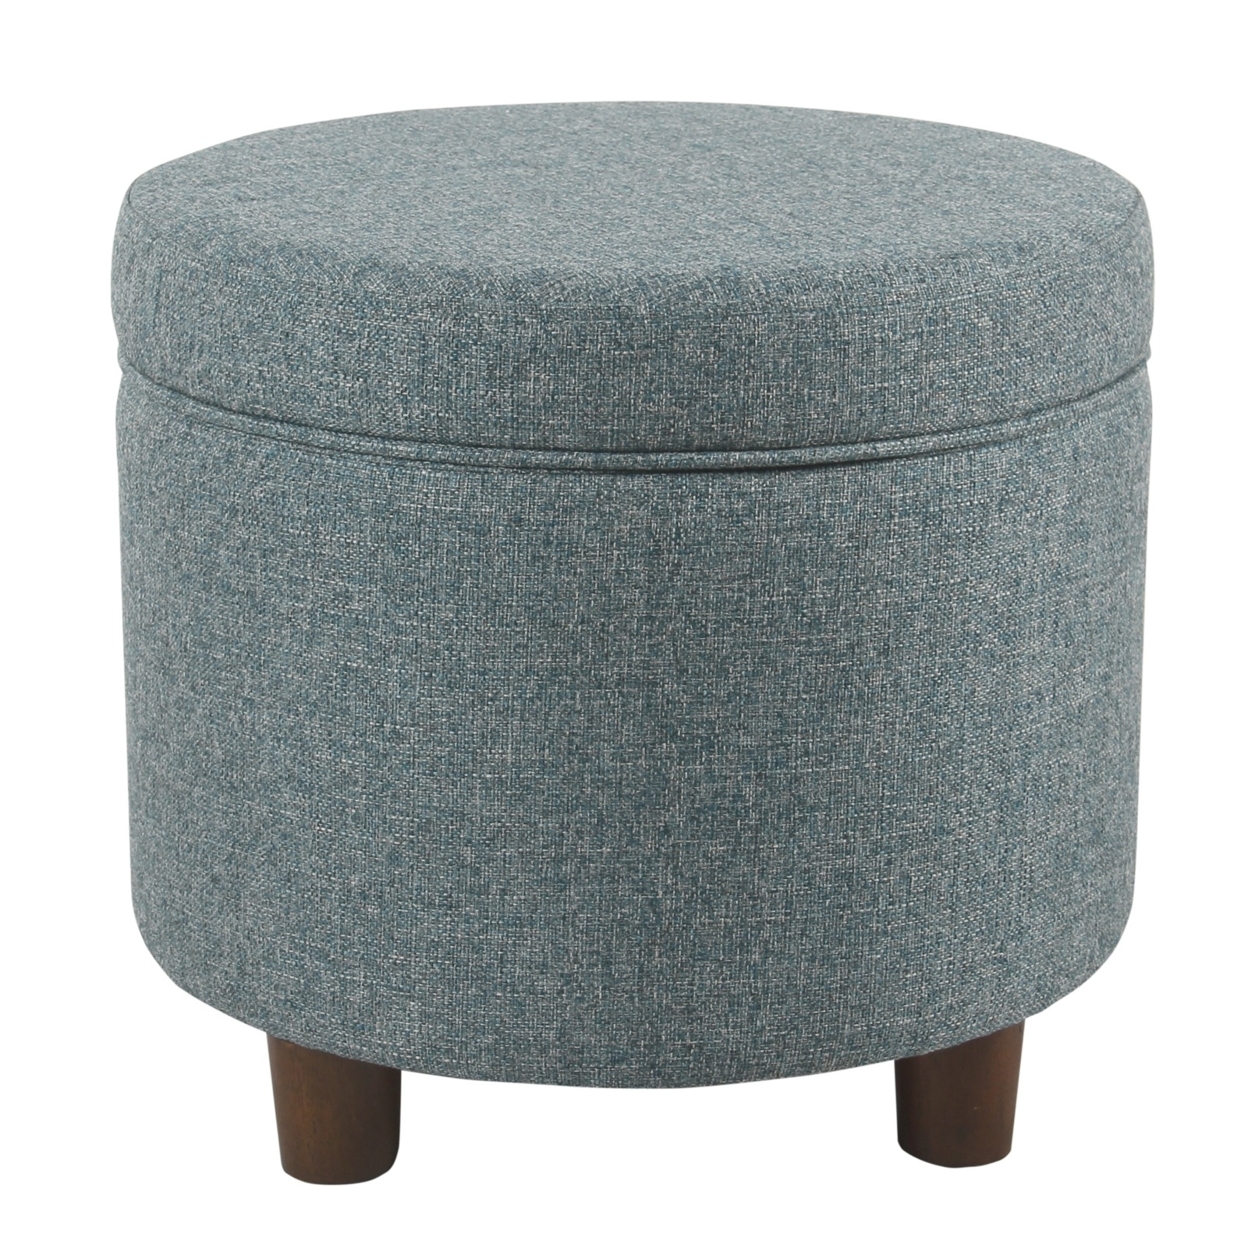 Fabric Upholstered Round Wooden Ottoman With Lift Off Lid Storage, Teal Blue- Saltoro Sherpi